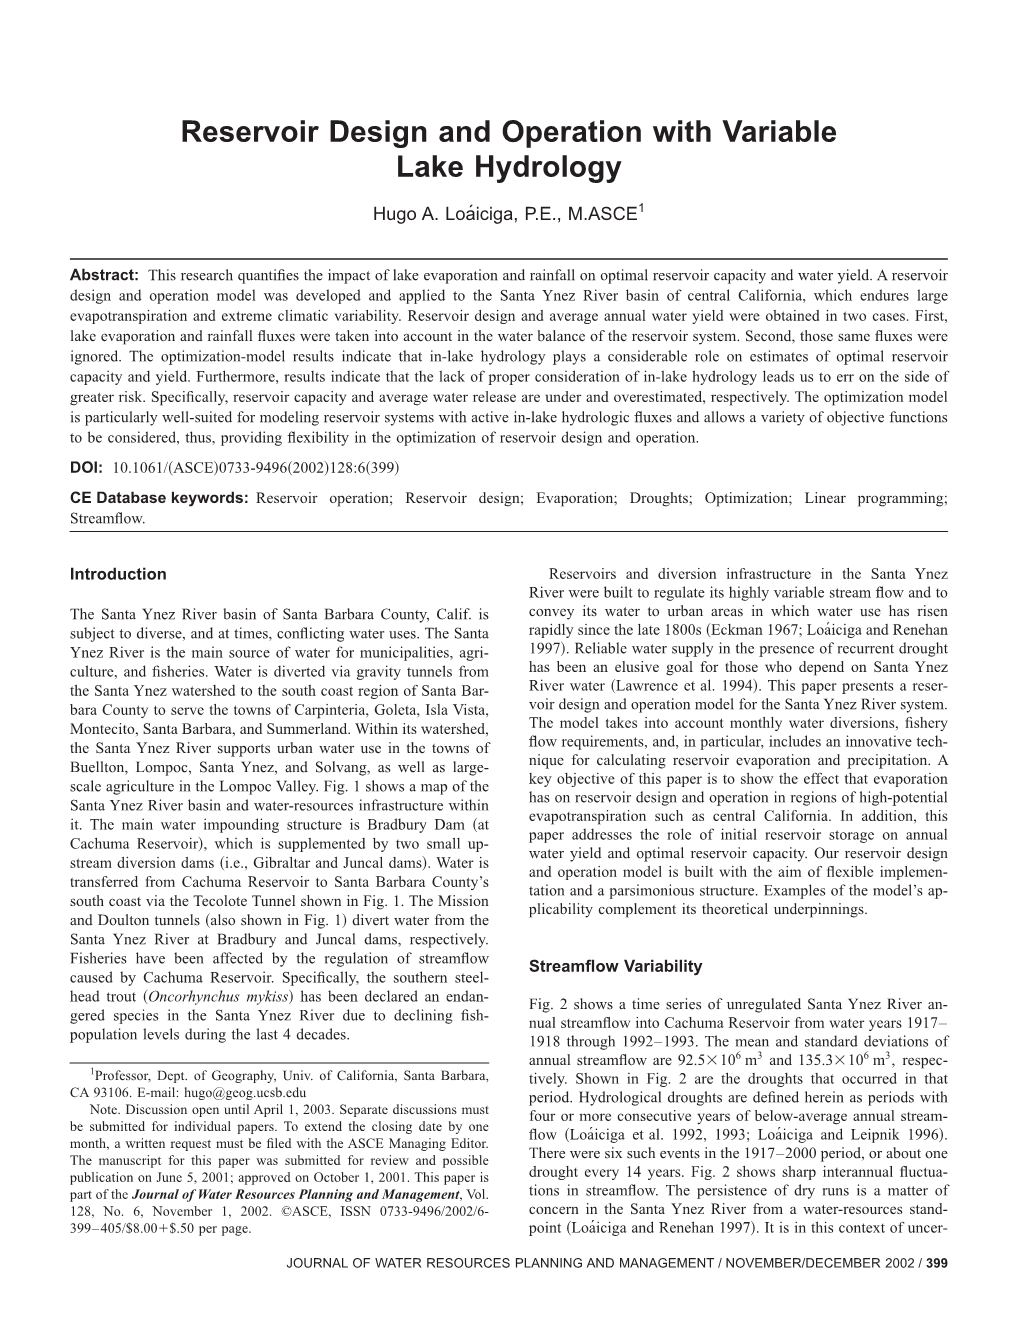 Reservoir Design and Operation with Variable Lake Hydrology